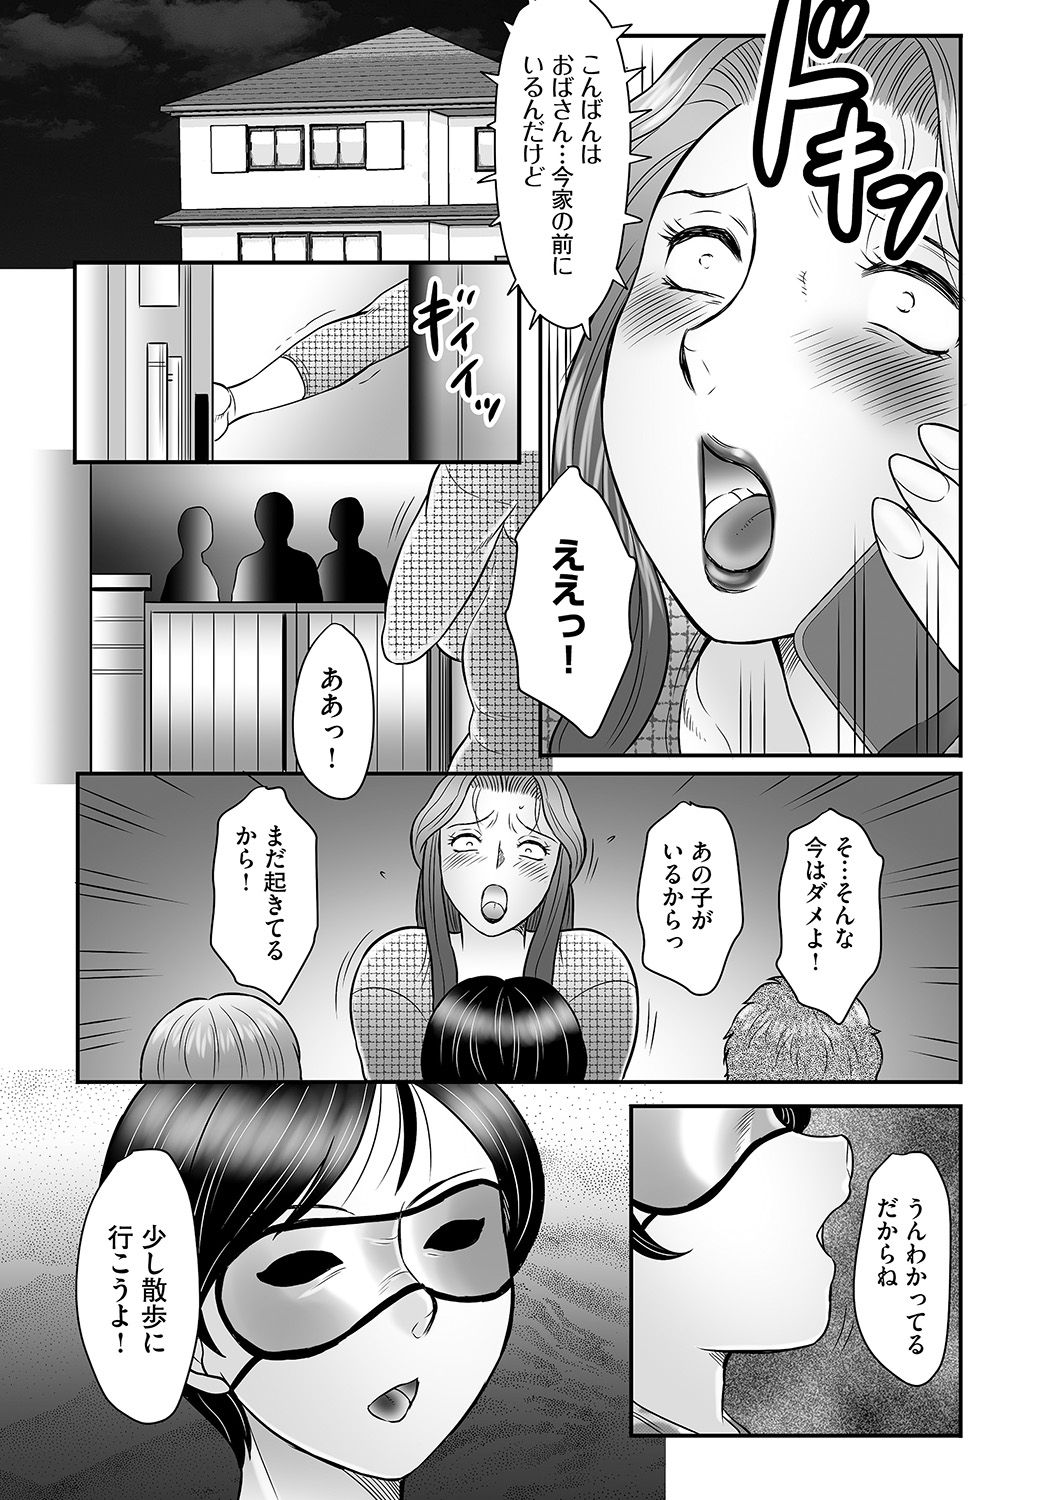 [Fuusen Club] Boshi no Susume - The advice of the mother and child Ch. 15 (Magazine Cyberia Vol. 74) [Digital] [風船クラブ] 母子のすすめ 第15話 (マガジンサイベリア Vol.74) [DL版]